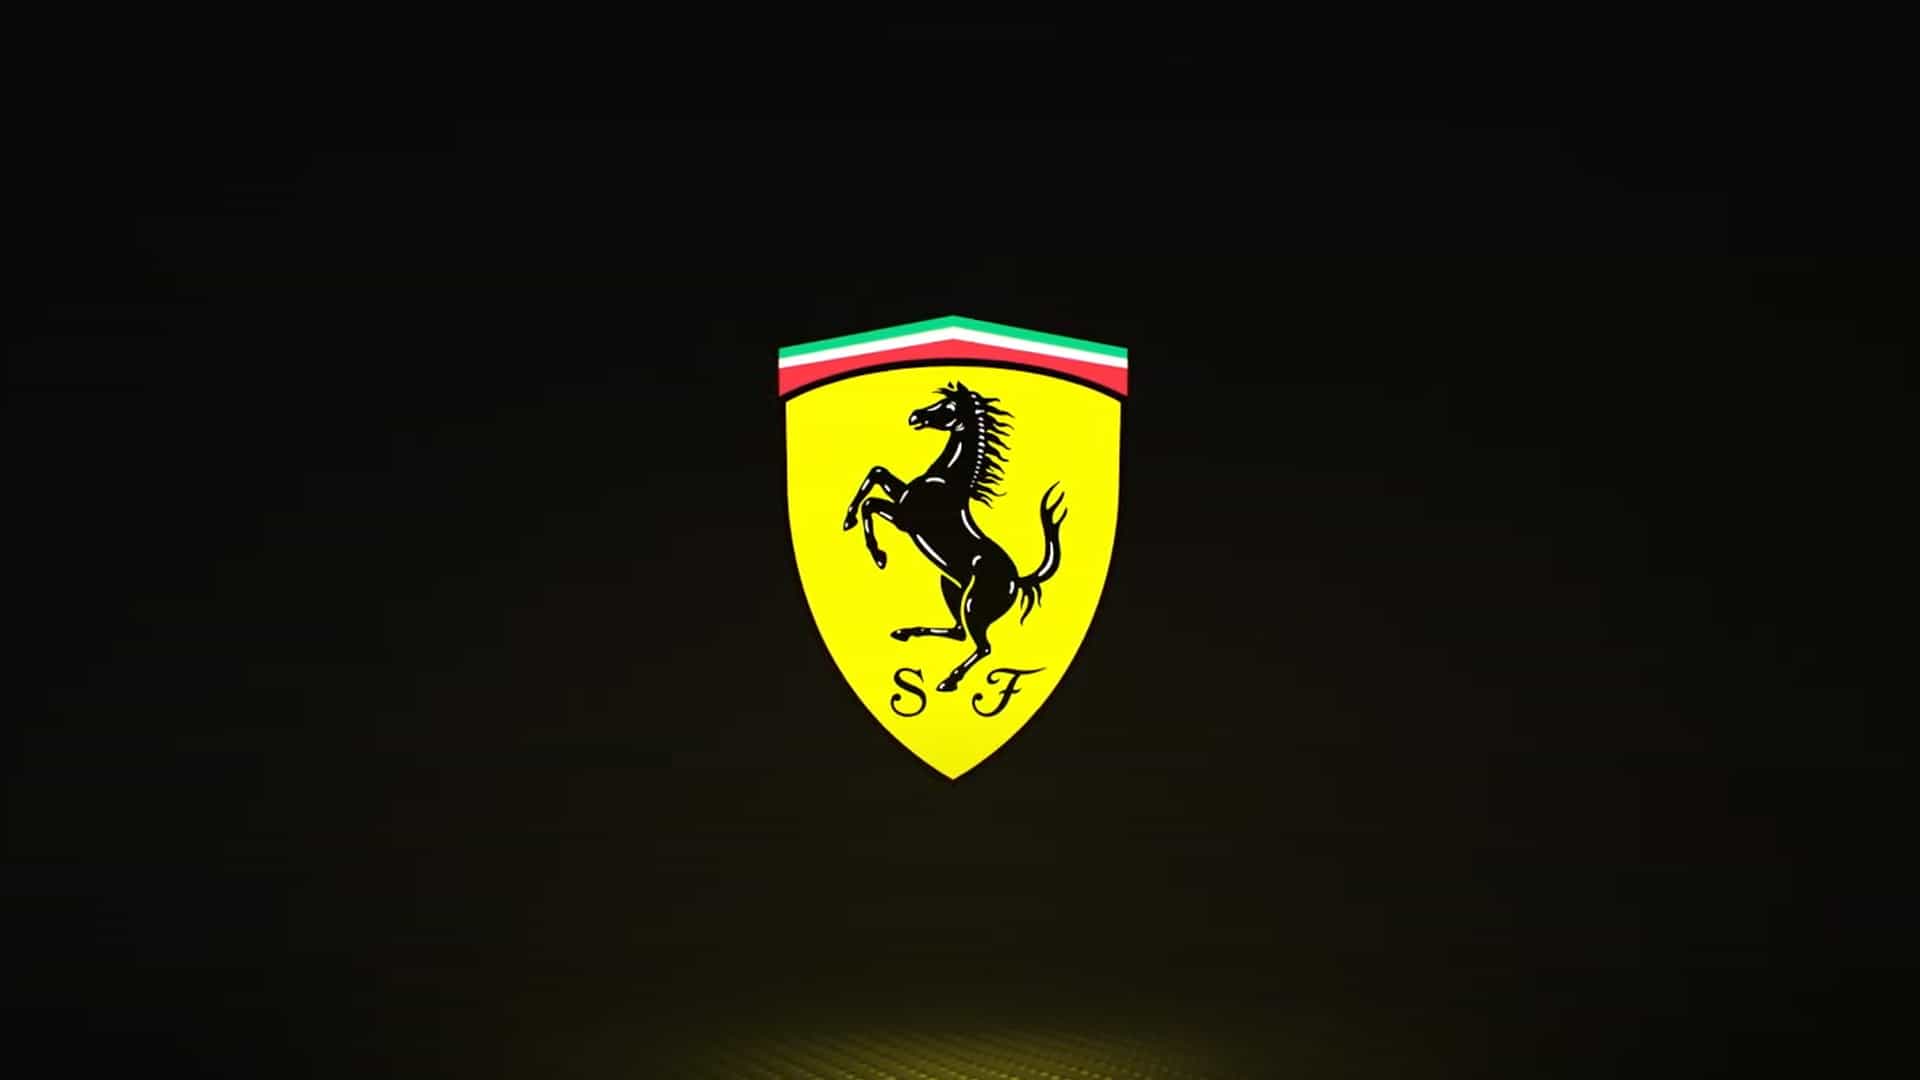 Ferrari cars coming to RaceRoom for the first time